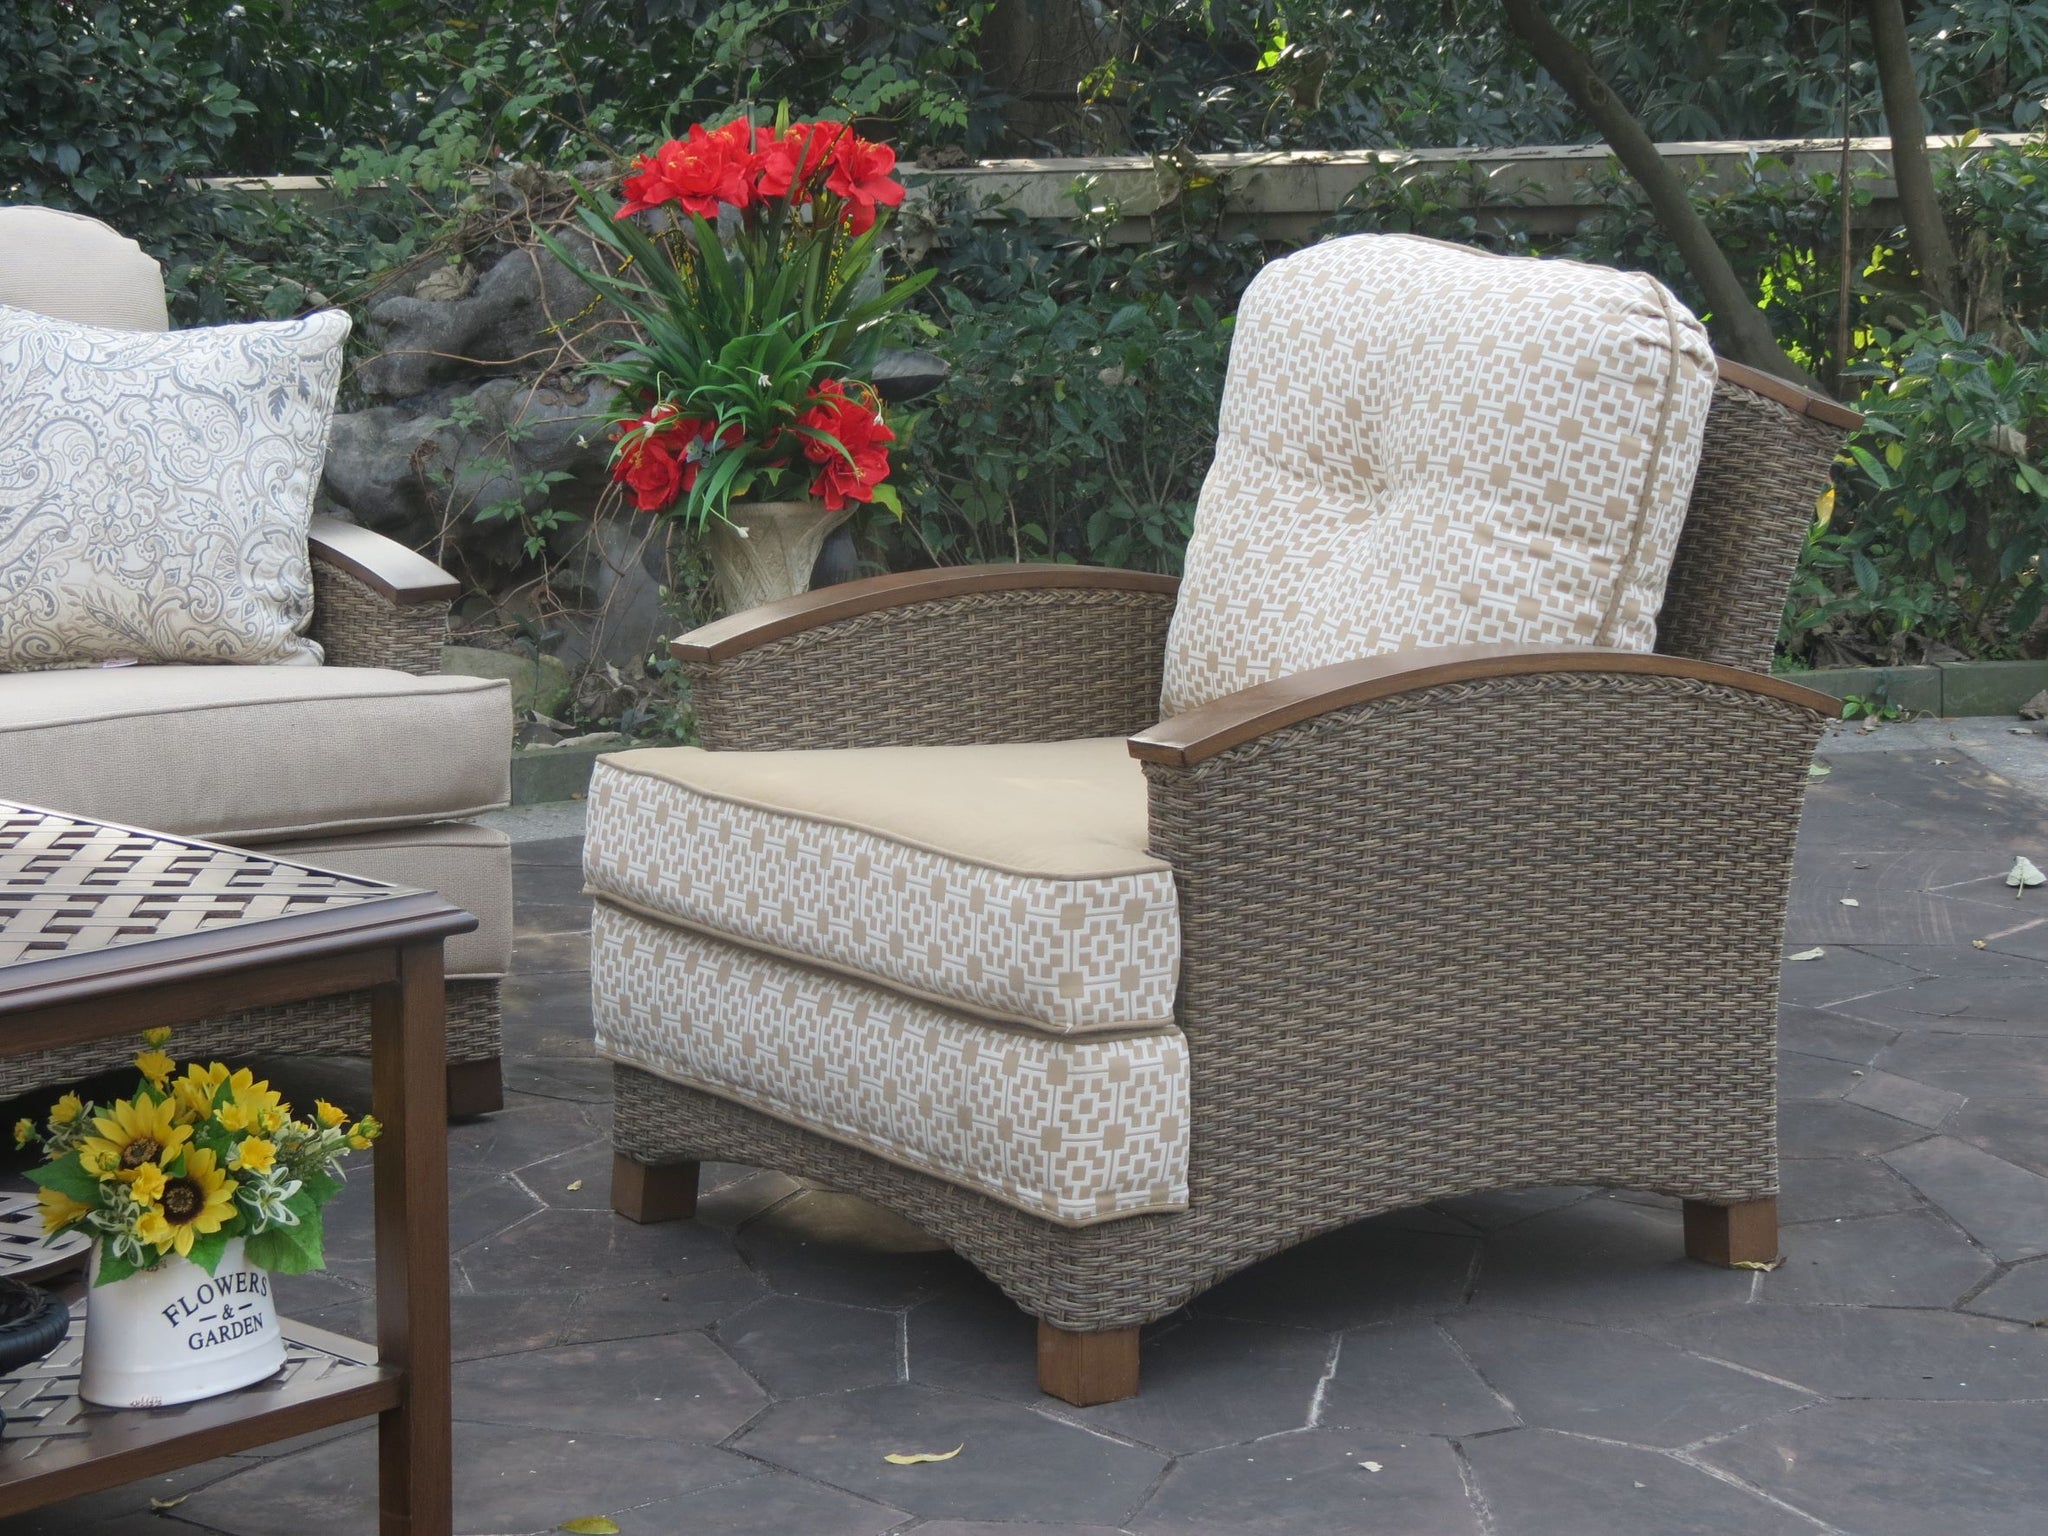 How to Care for Your Patio Furniture.